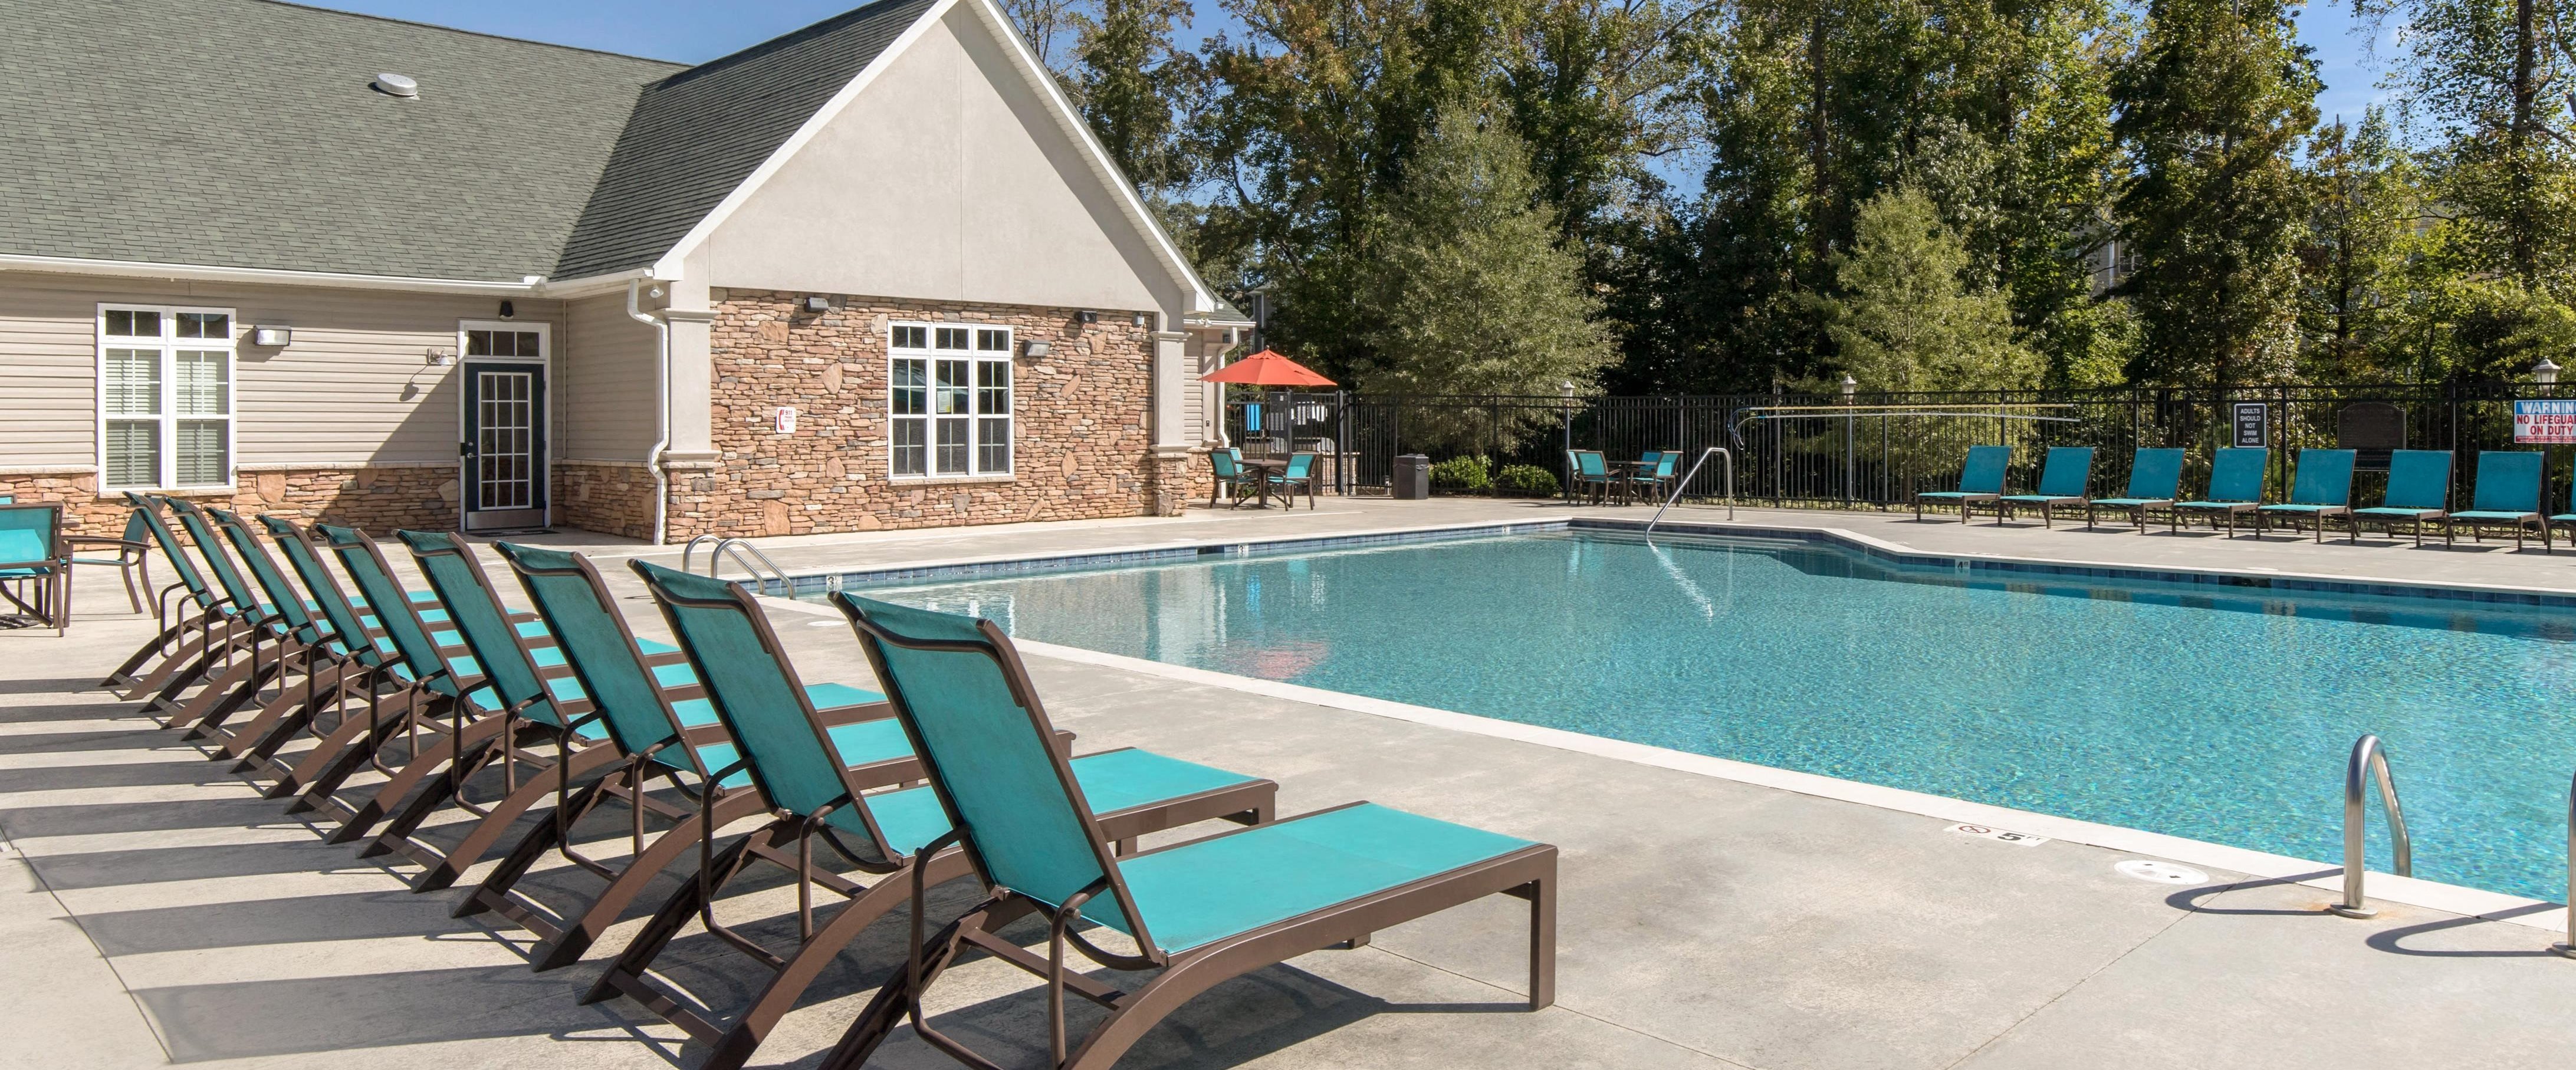 Ashley Court Apartments for Rent in Charlotte NC